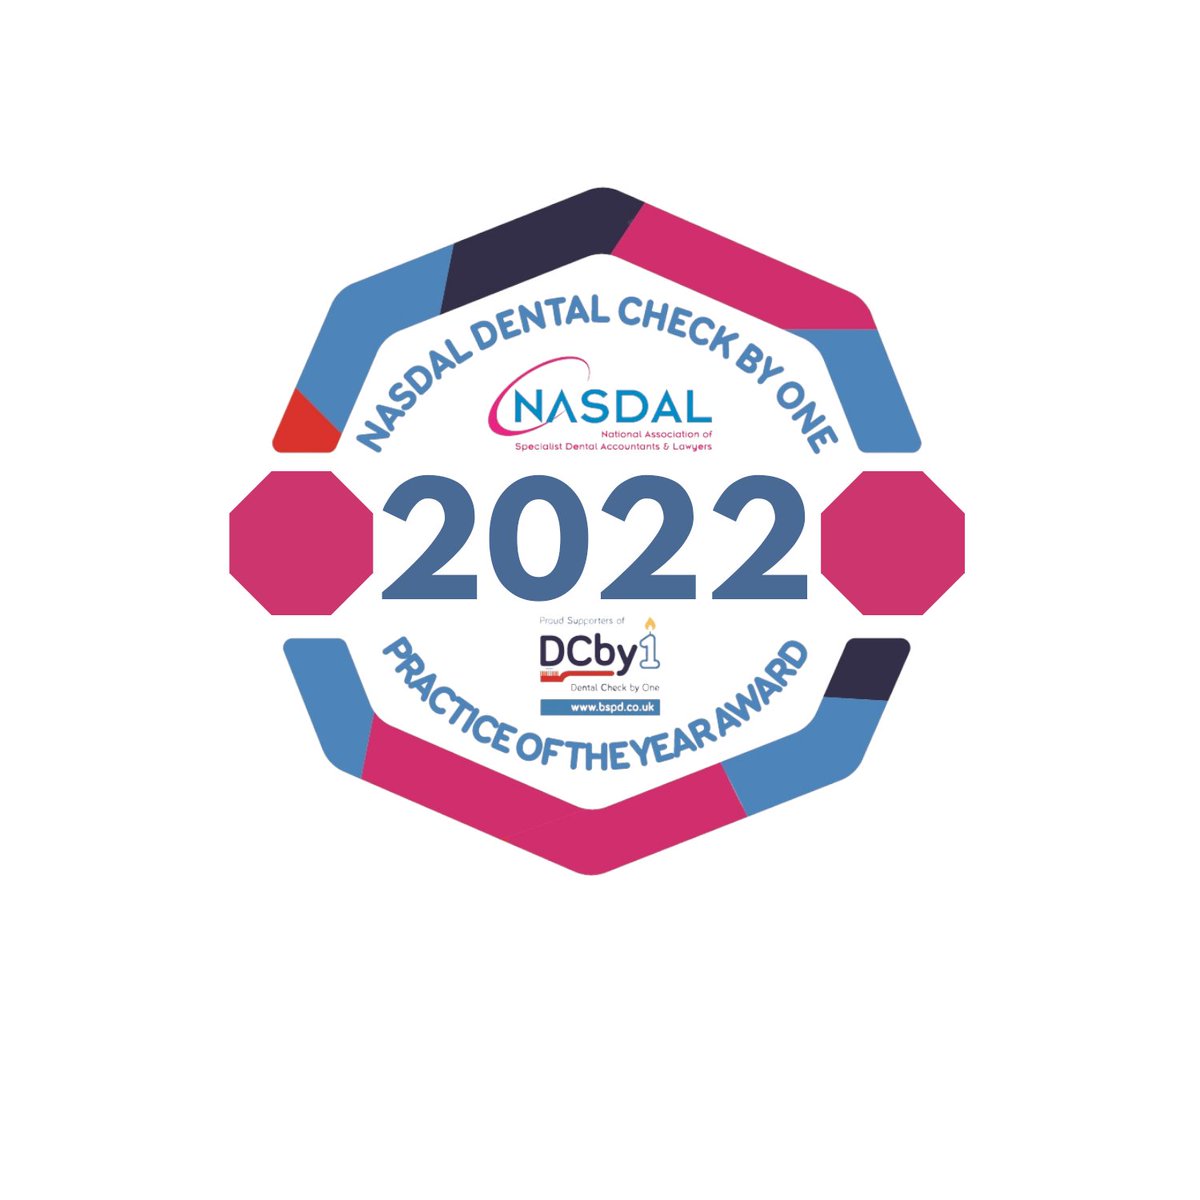 NASDAL #DCby1 Practice of the Year Award 2022 has just launched! The award seeks to recognise a practice that has successfully introduced the @bspduk Dental Check by One into their practice. Make sure you enter here - bit.ly/3odqeAo #DCby1